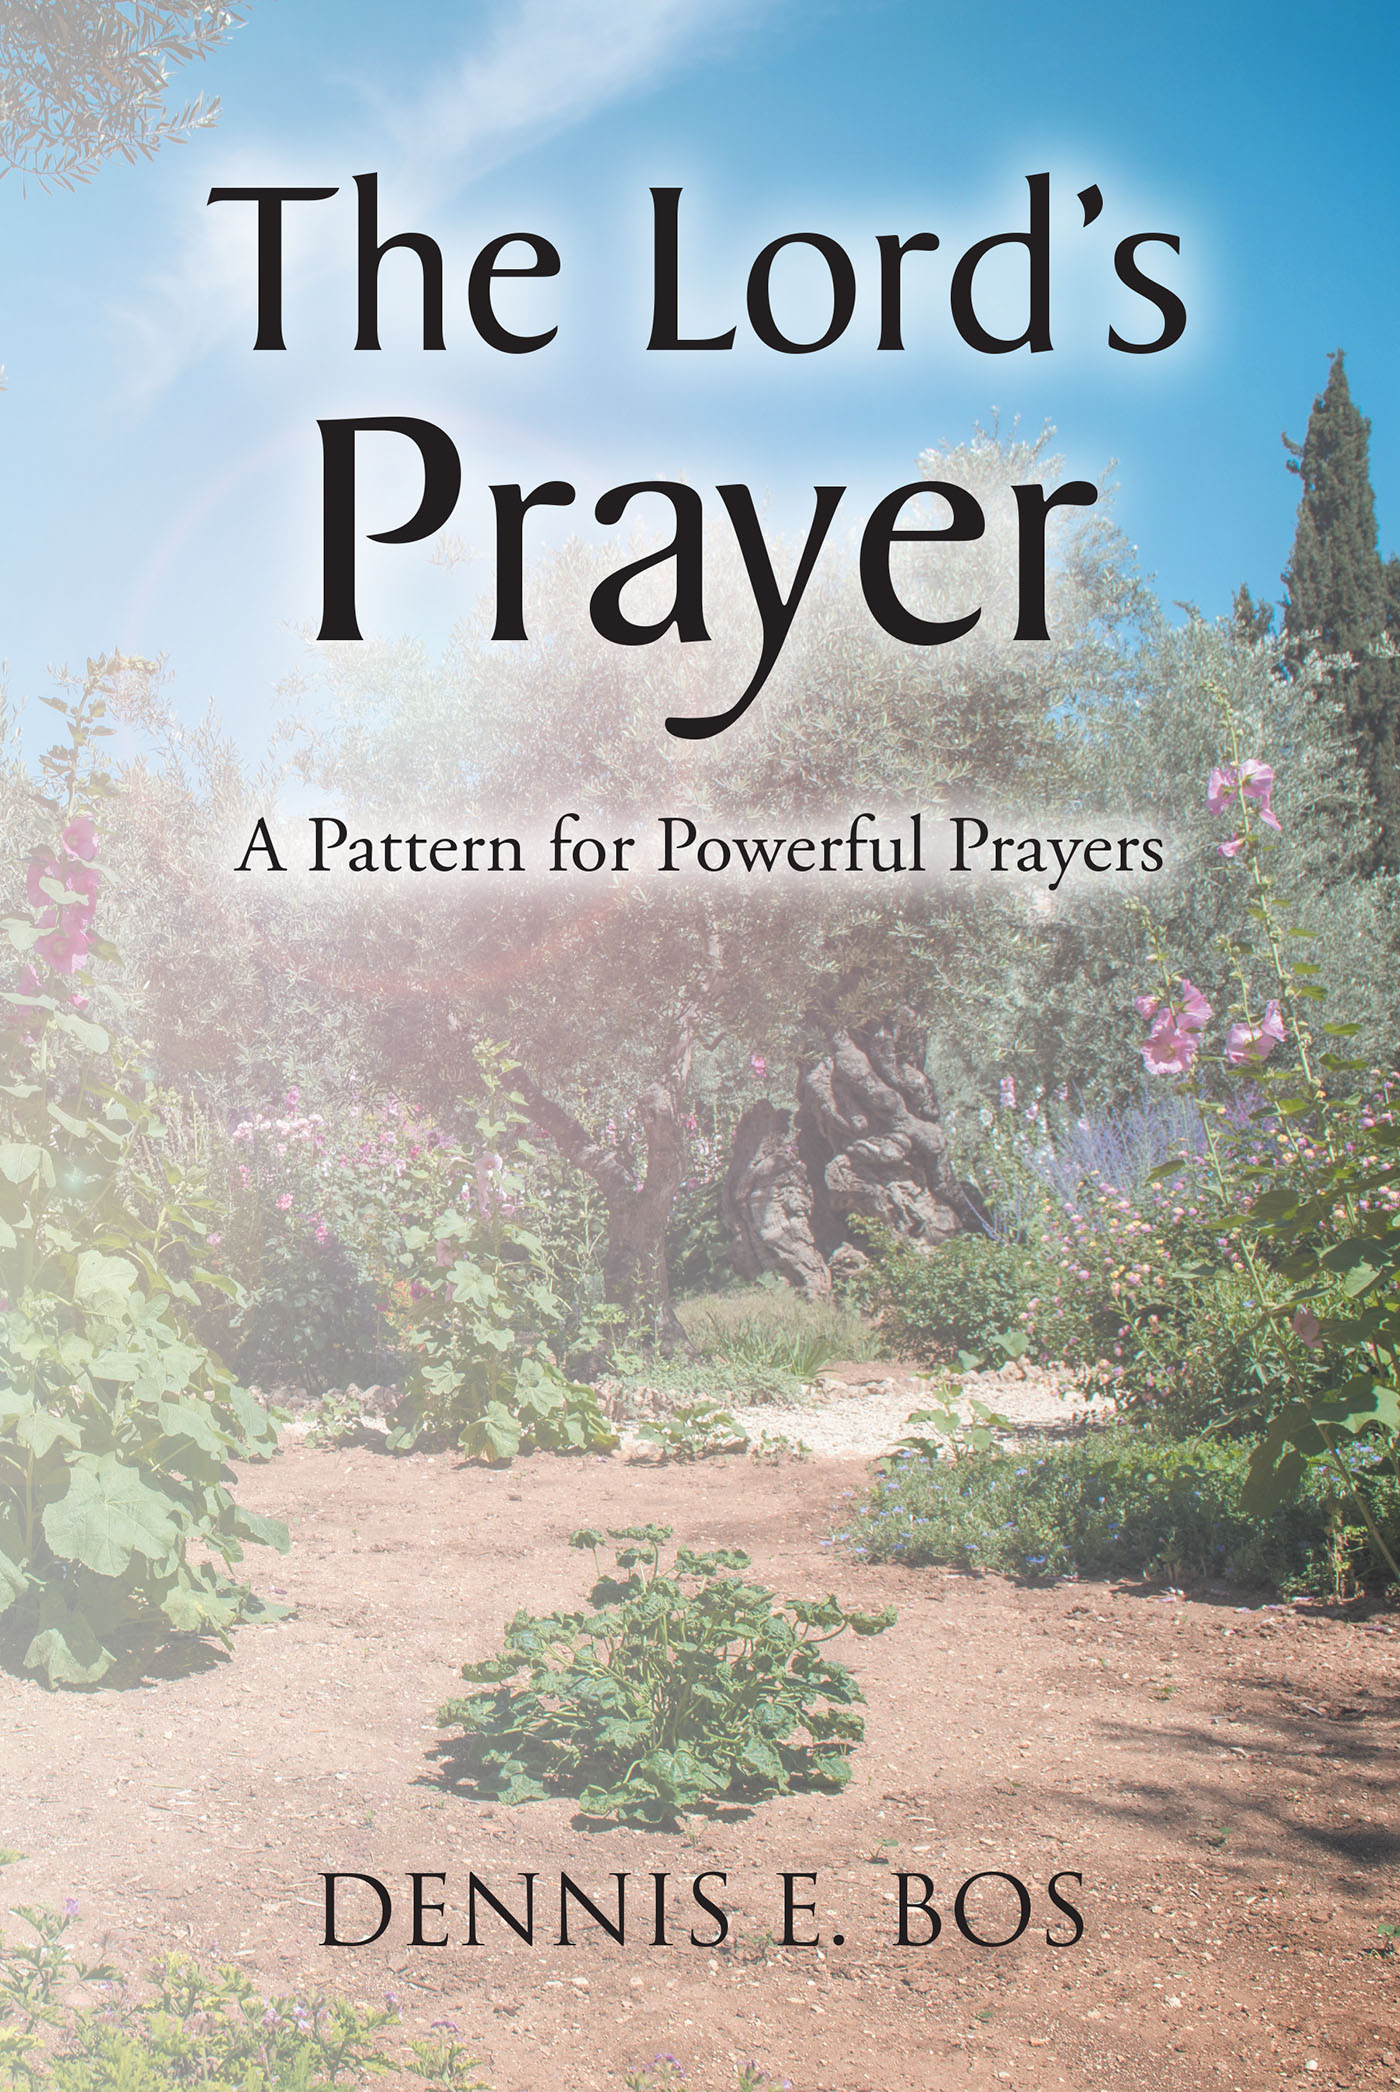 Dennis E. Bos’s Newly Released "The Lord’s Prayer: A Pattern for Powerful Prayers" is an Uplifting Resource for Developing a Deeper Understanding of Effective Prayer